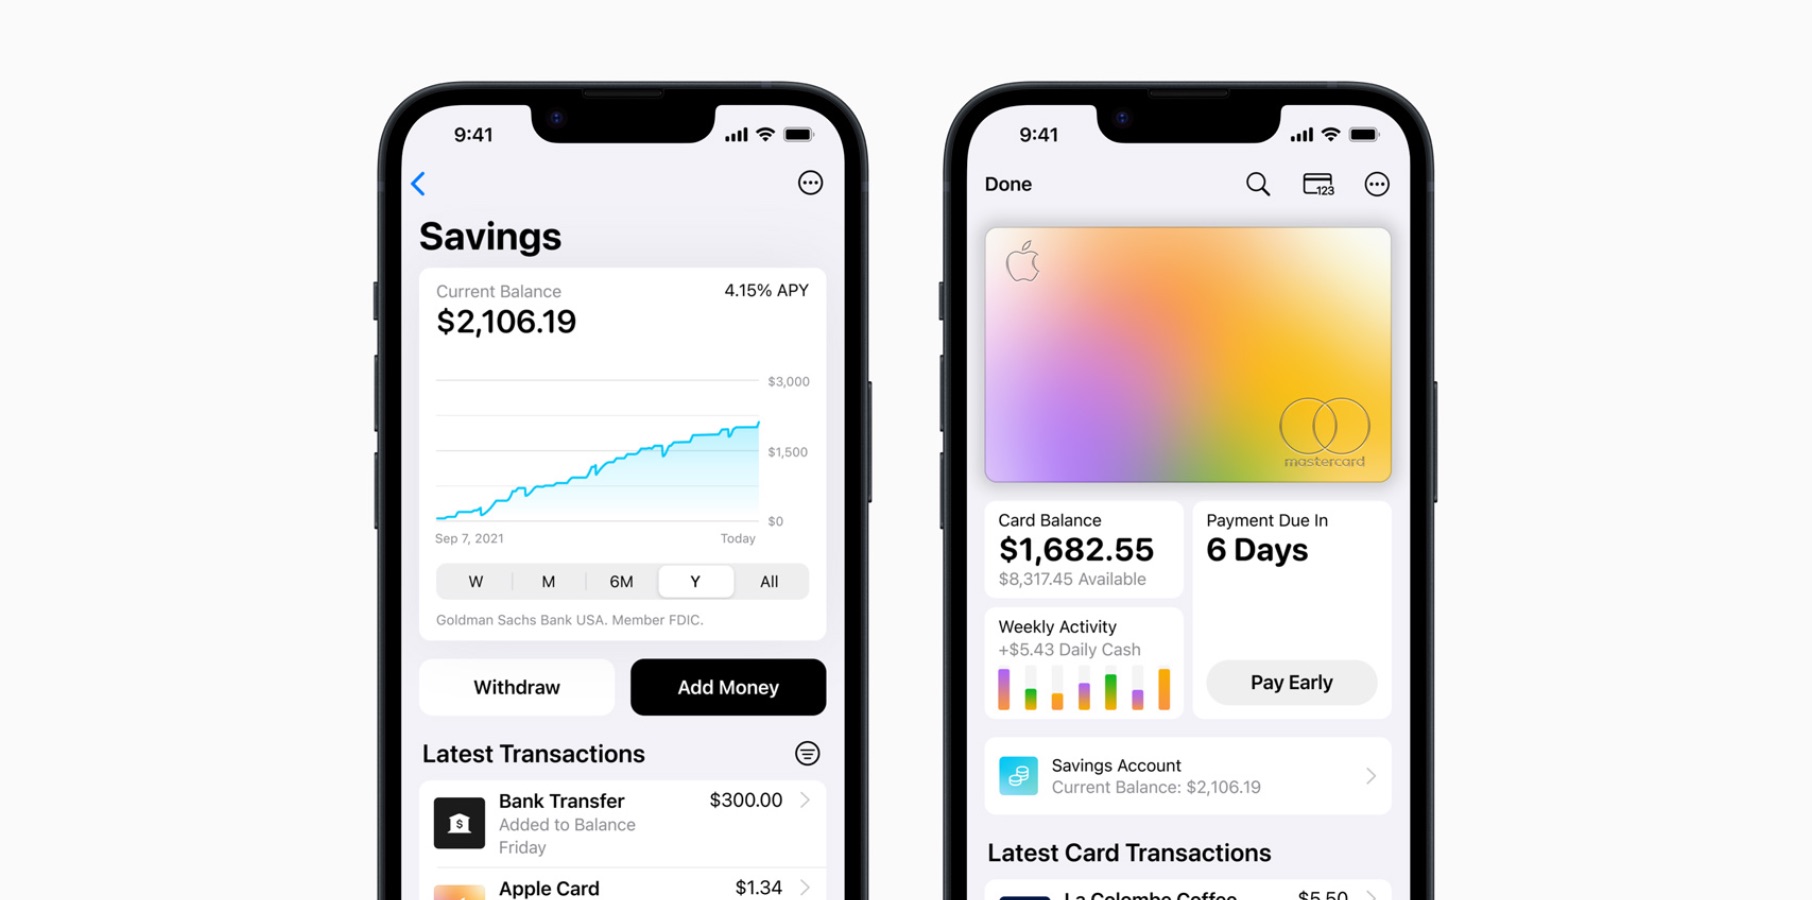 Apple’s new Savings account might have already crossed $1 billion in deposits